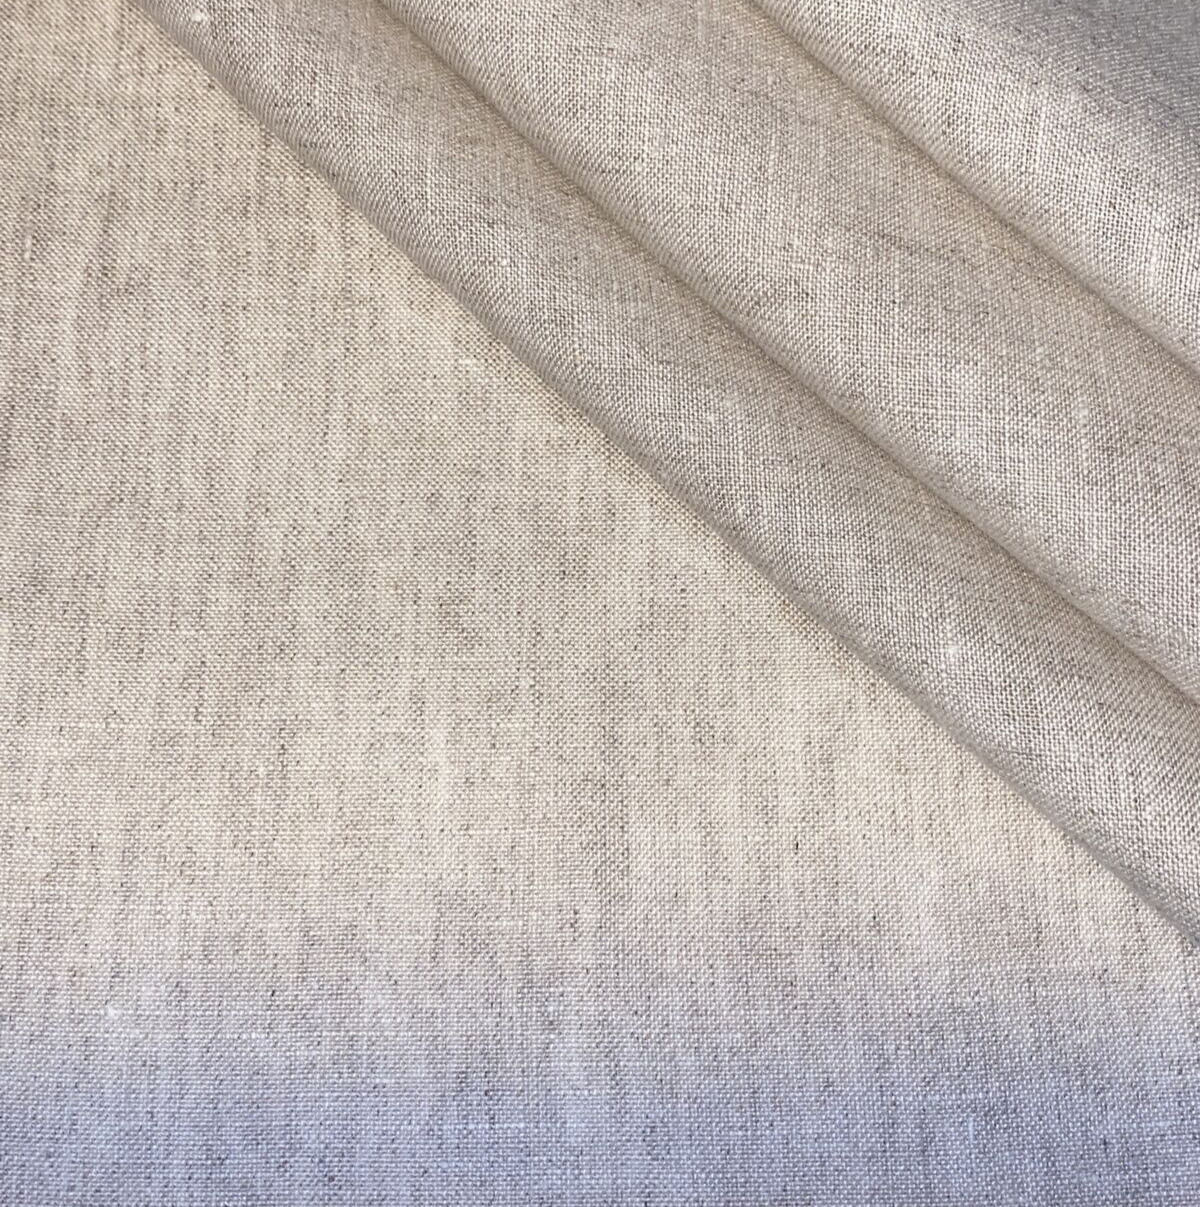 Solid Tan Linen Fabric By The Yard